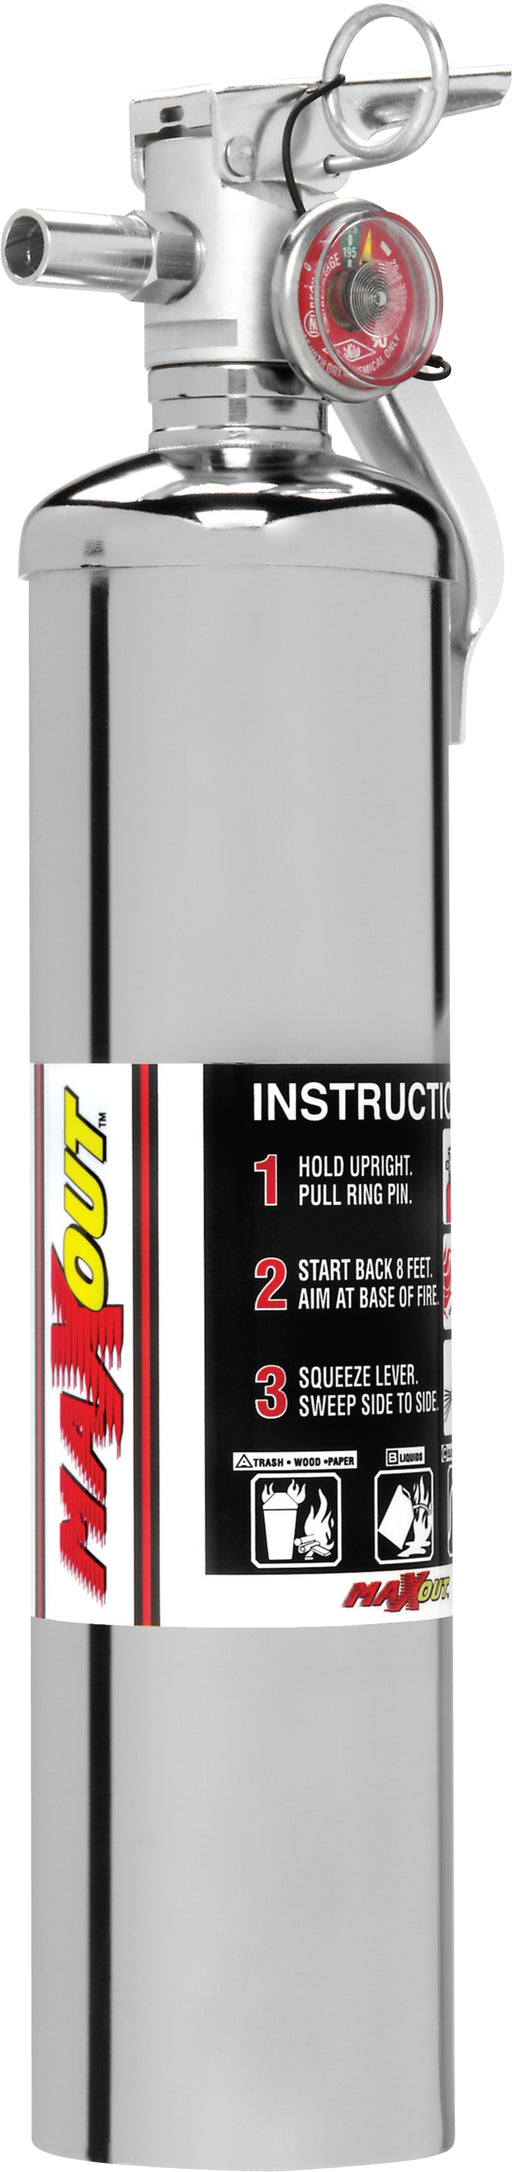 H3R Performance MAXOUT (TM) Fire Extinguisher MX250C Extinguishing Agent - Dry Chemical  Bottle Volume (LB) - 2.5 Pounds  Color - Silver  Material - Steel  Includes Mounting Brackets - Yes  USCG Approved - Yes